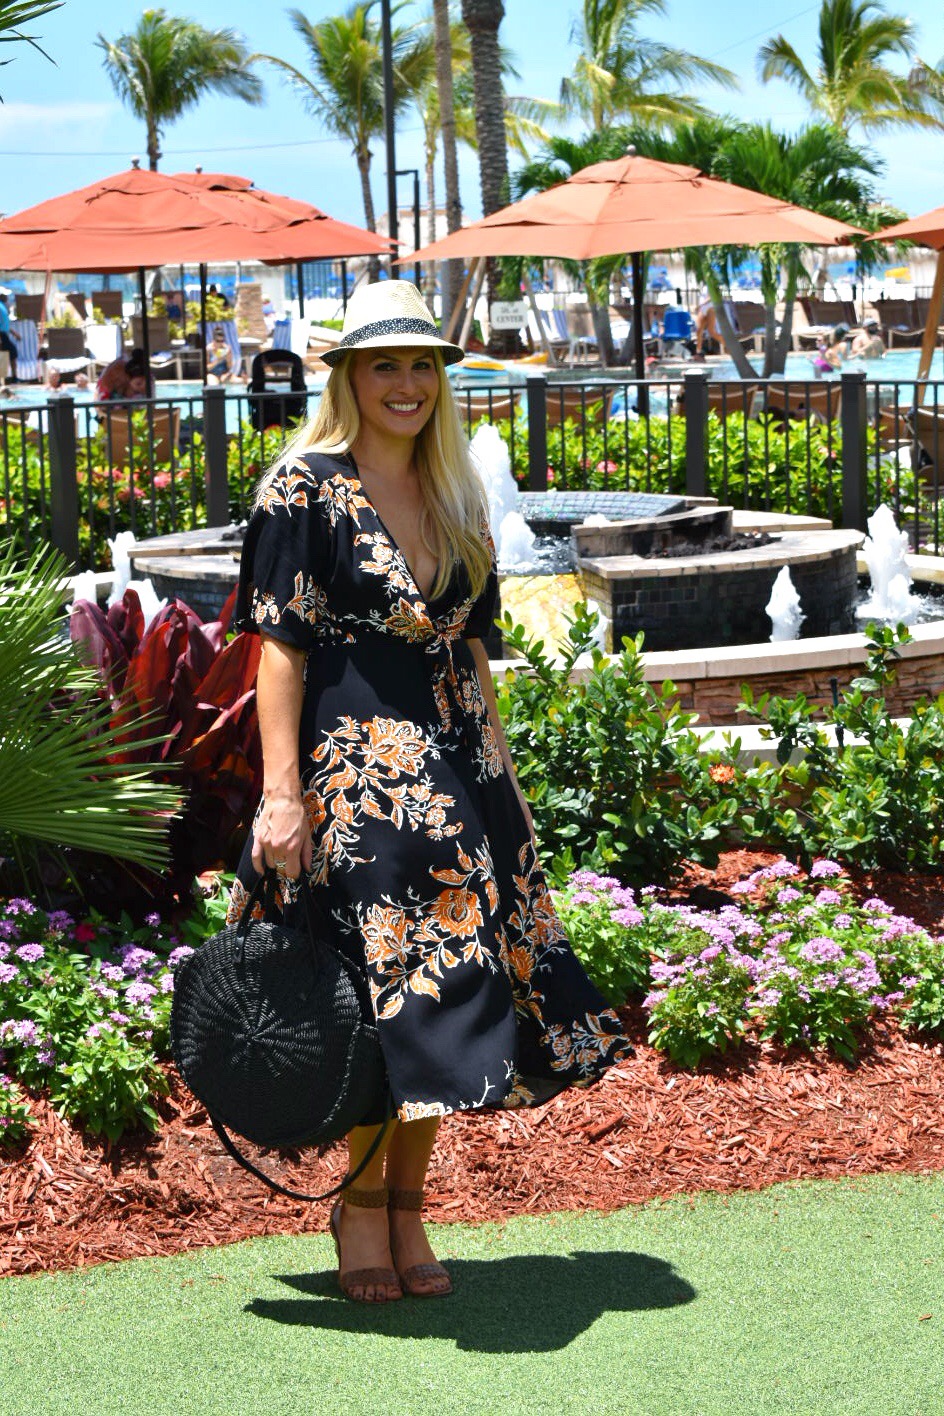 Floral Wrap Dress, Fedora and Round Straw Bag in Marco Island Florida